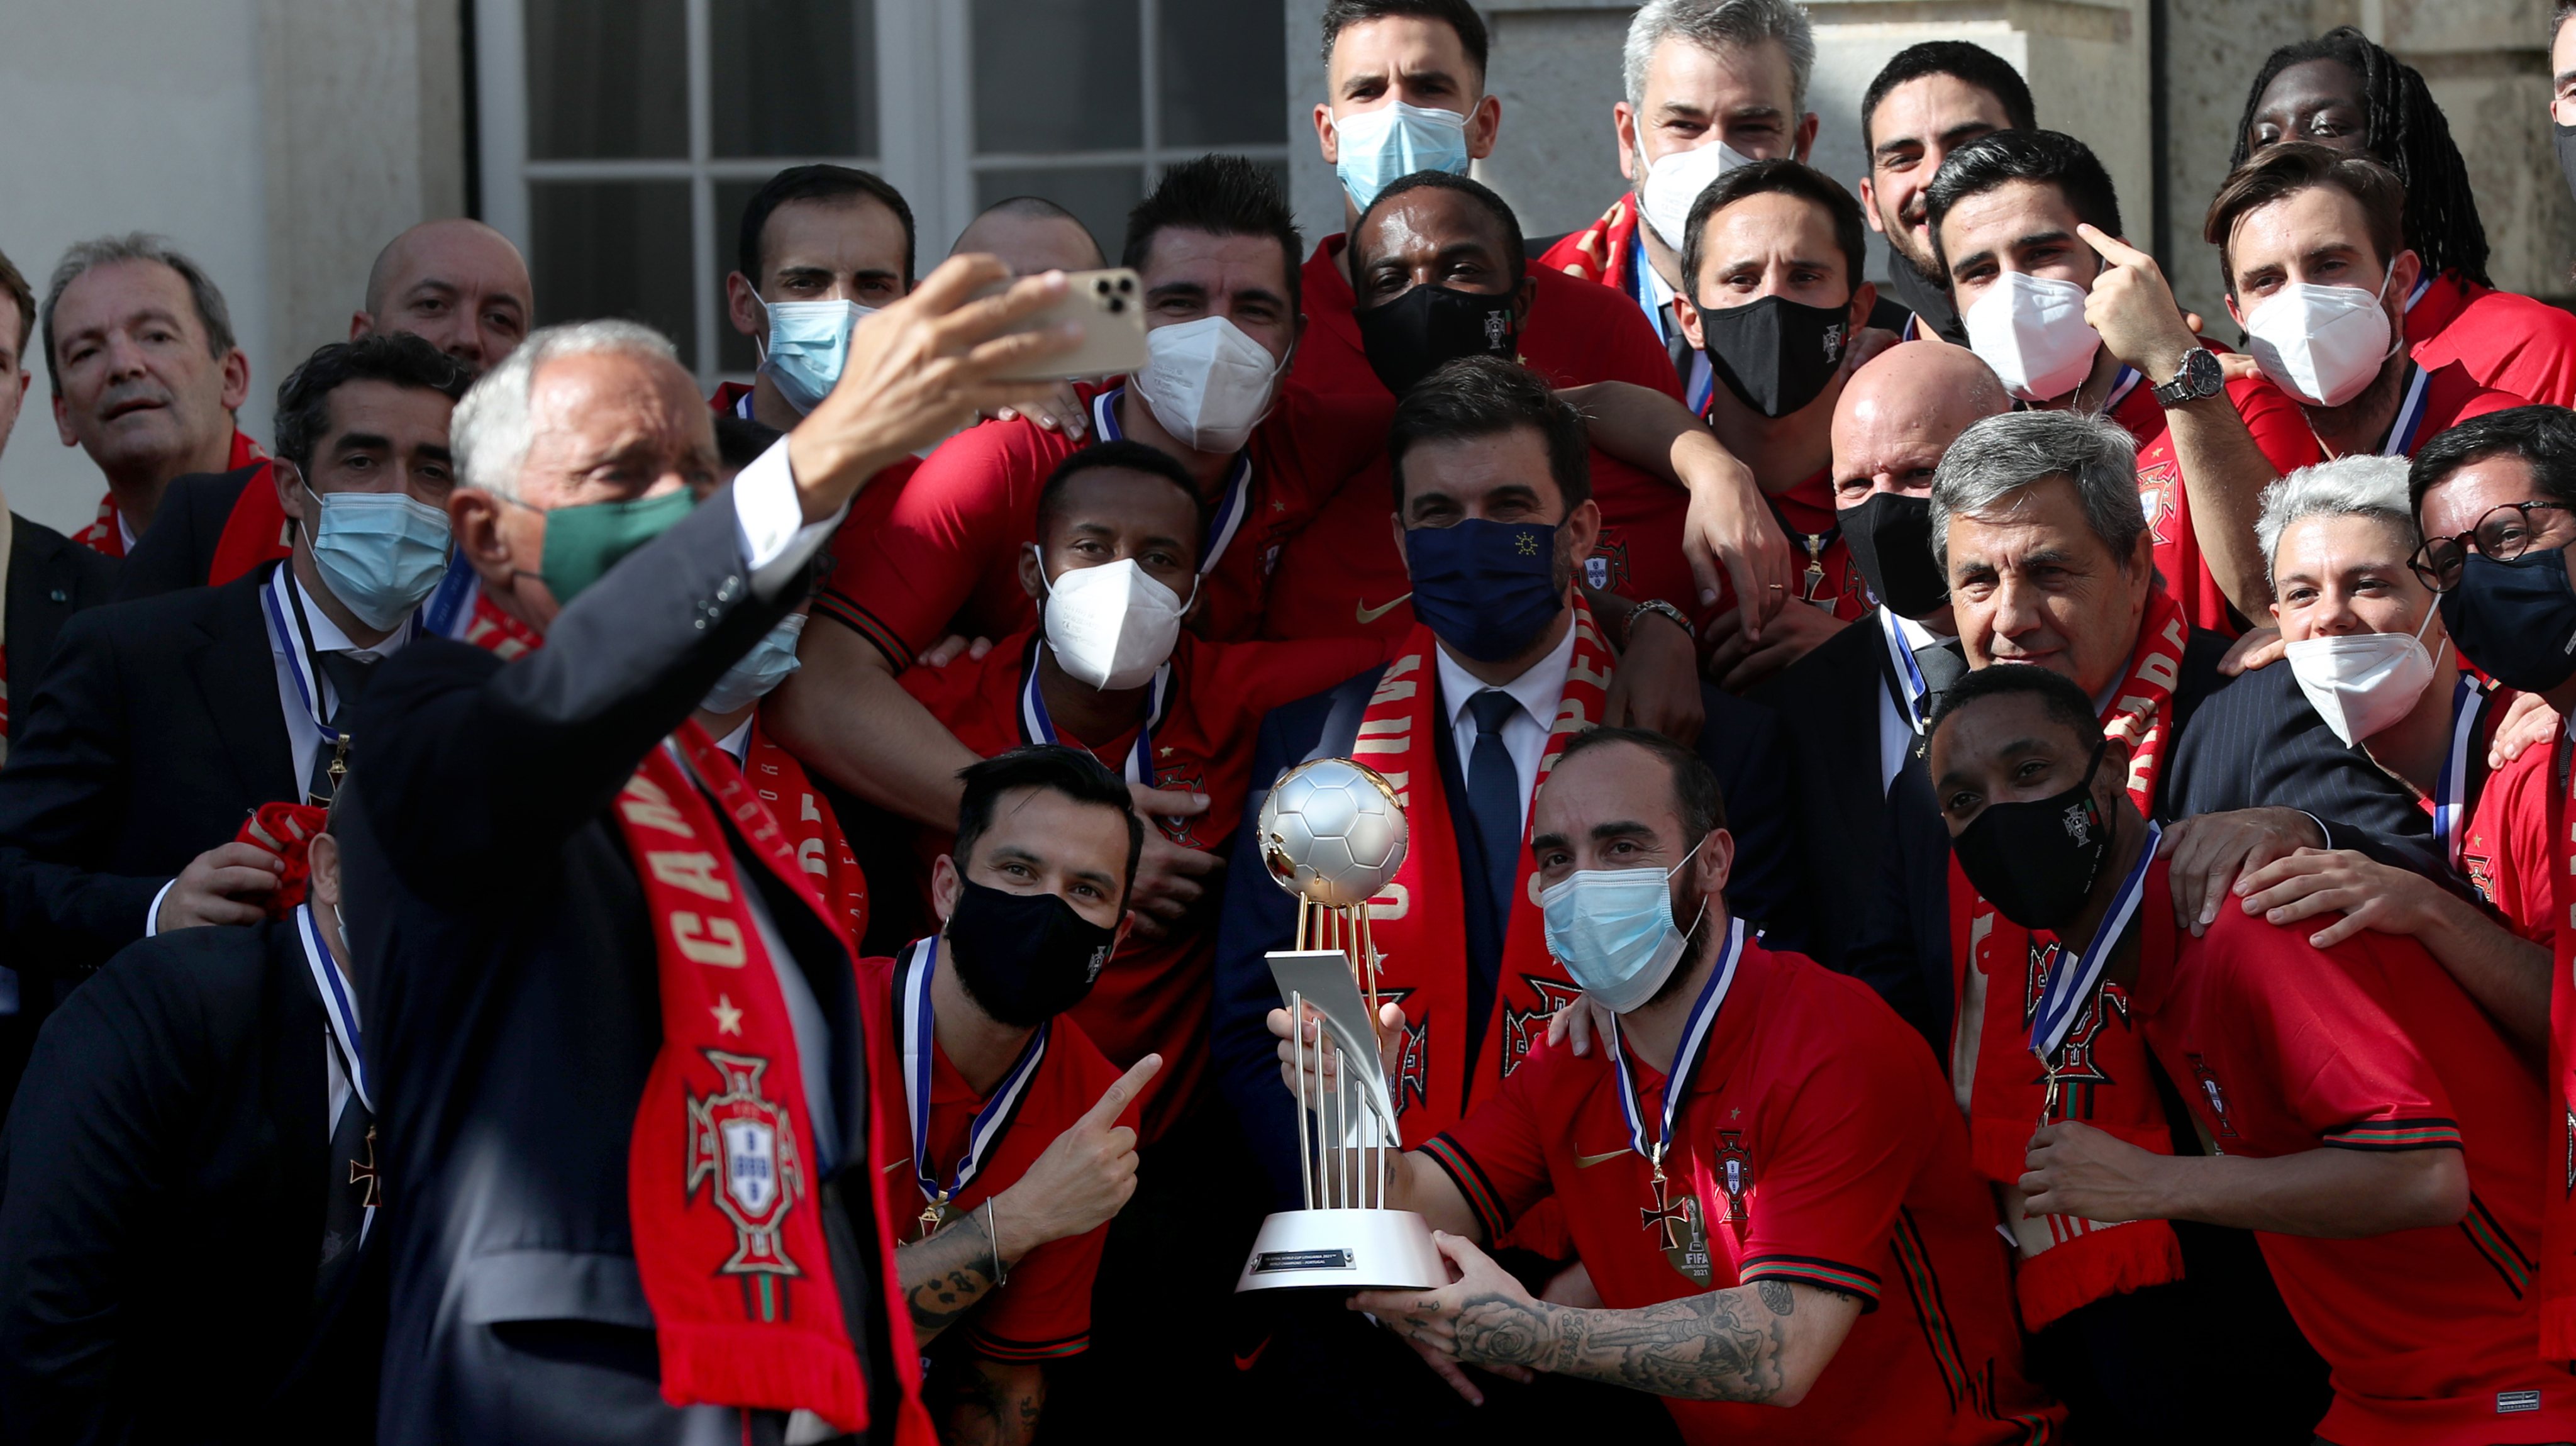 Portuguese President welcomes National Futsal team after winning the FIFA Futsal World Cup 2021